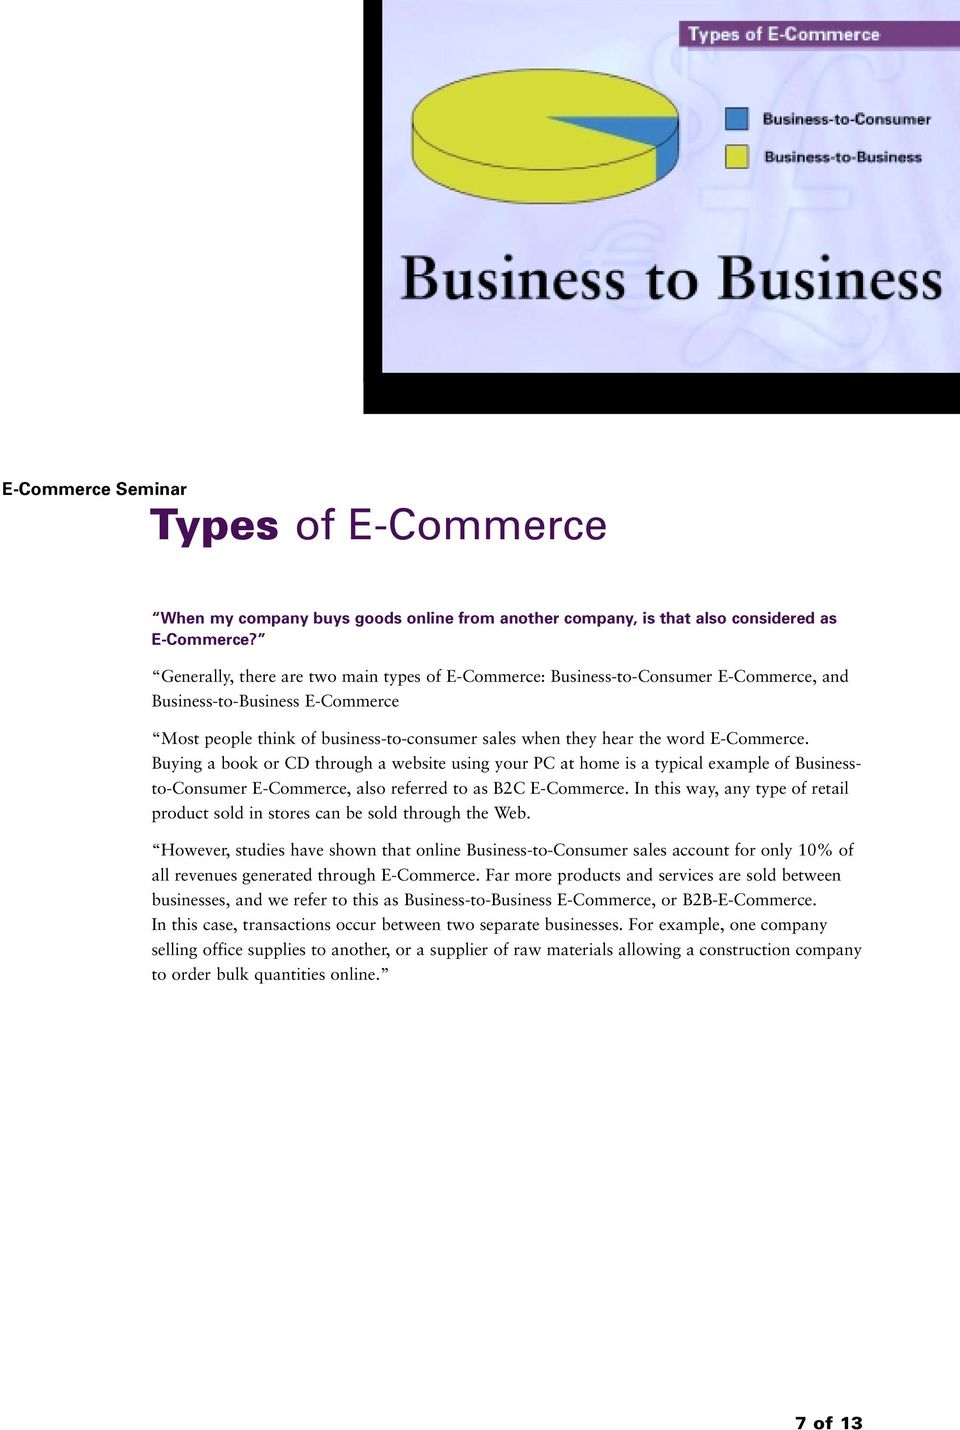 E-Commerce. Buying a book or CD through a website using your PC at home is a typical example of Businessto-Consumer E-Commerce, also referred to as B2C E-Commerce.